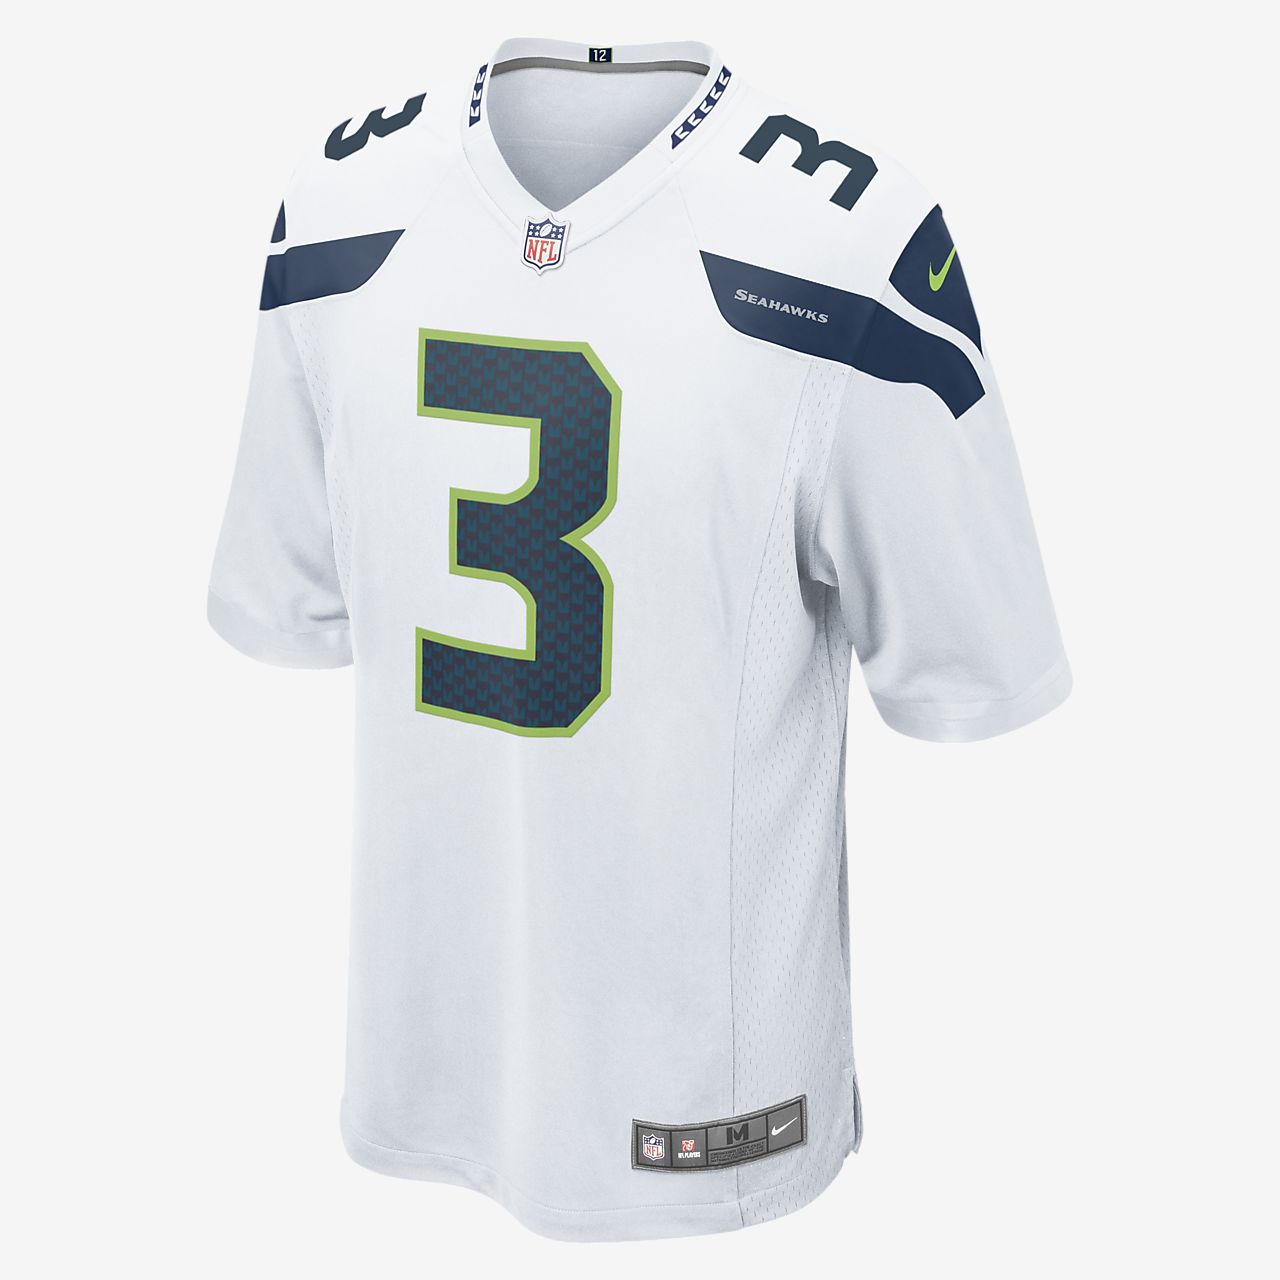 russell wilson game jersey